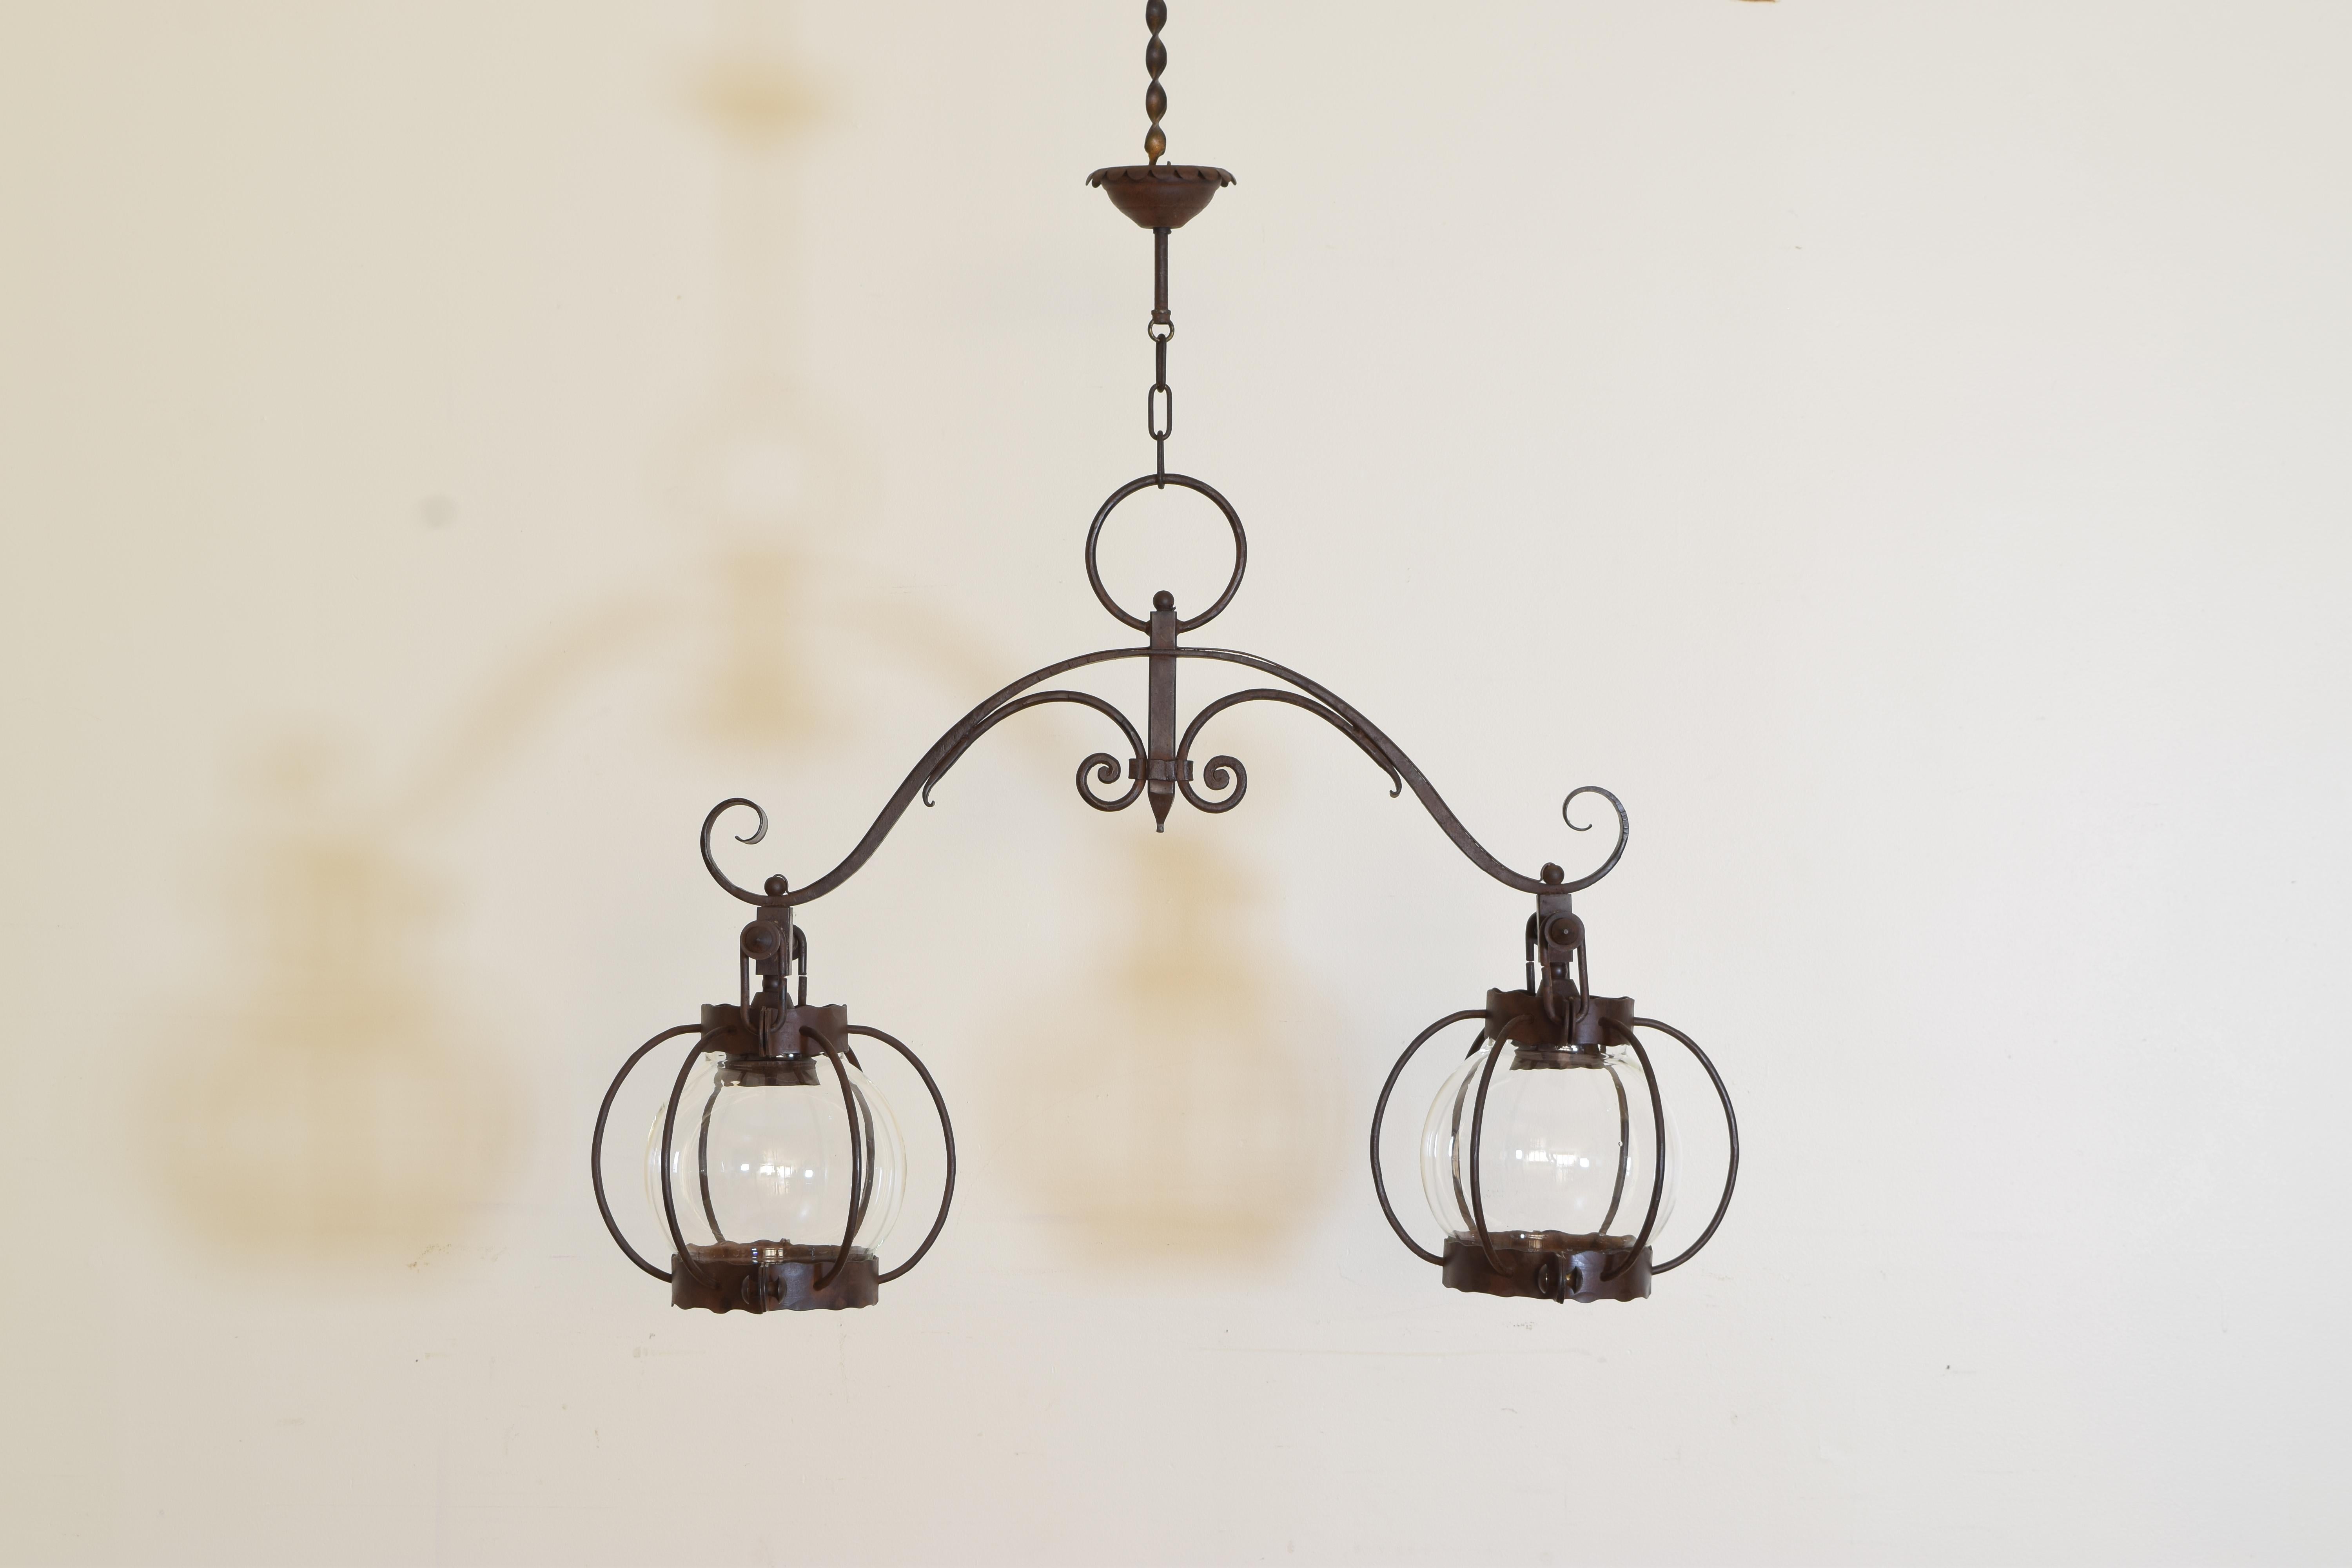 Consisting of two “caged” glass globes hanging from an elaborately wrought iron support, the craftsmanship exceptional and the glass globes original, kitchen island, billiards, among the applications.